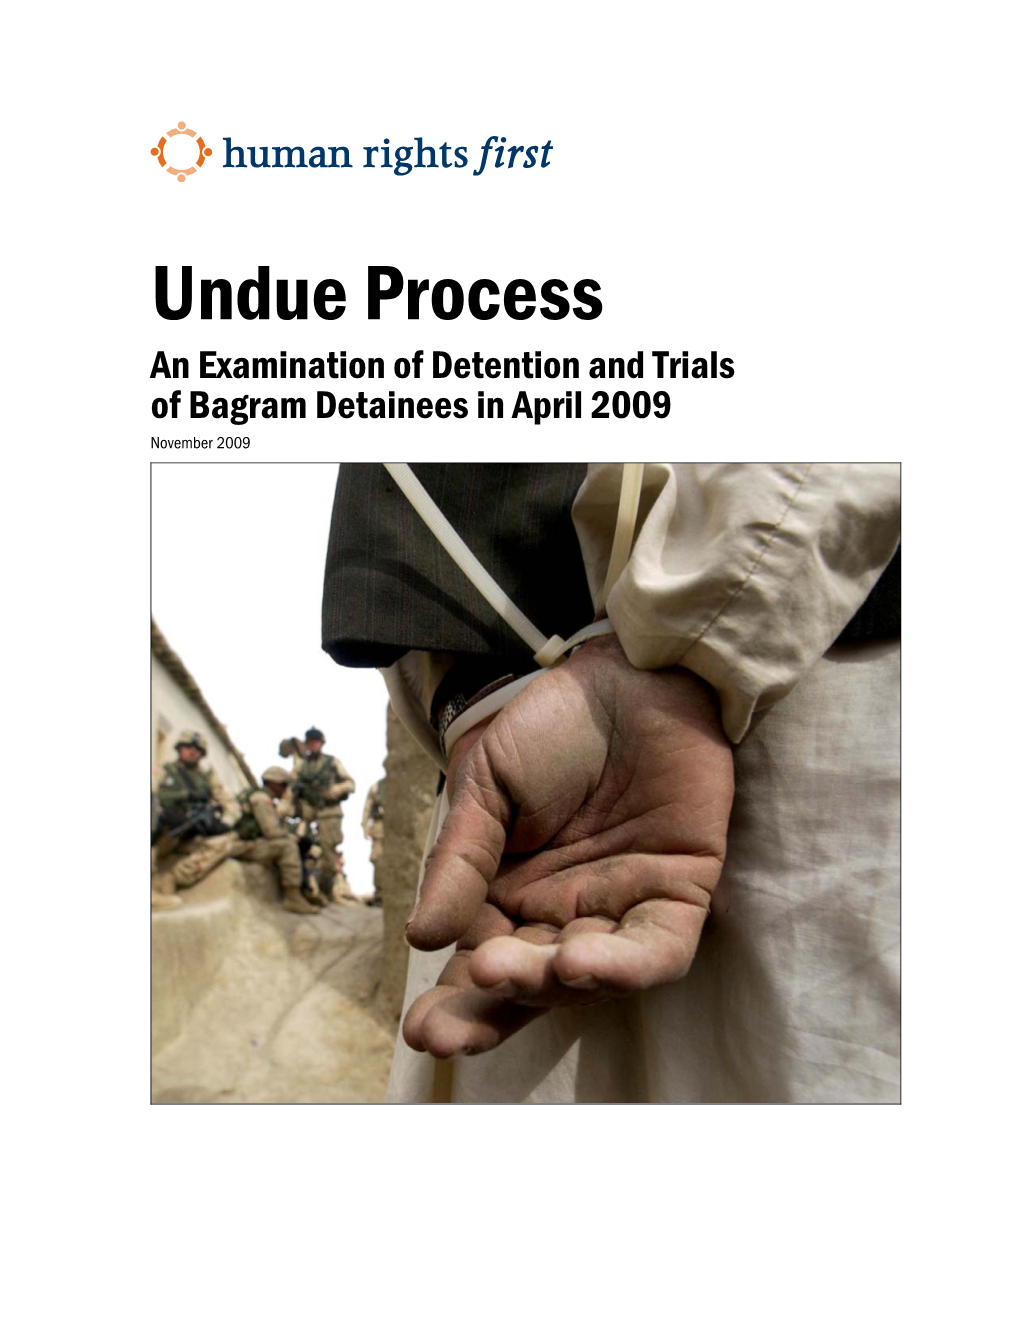 Undue Process an Examination of Detention and Trials of Bagram Detainees in April 2009 November 2009